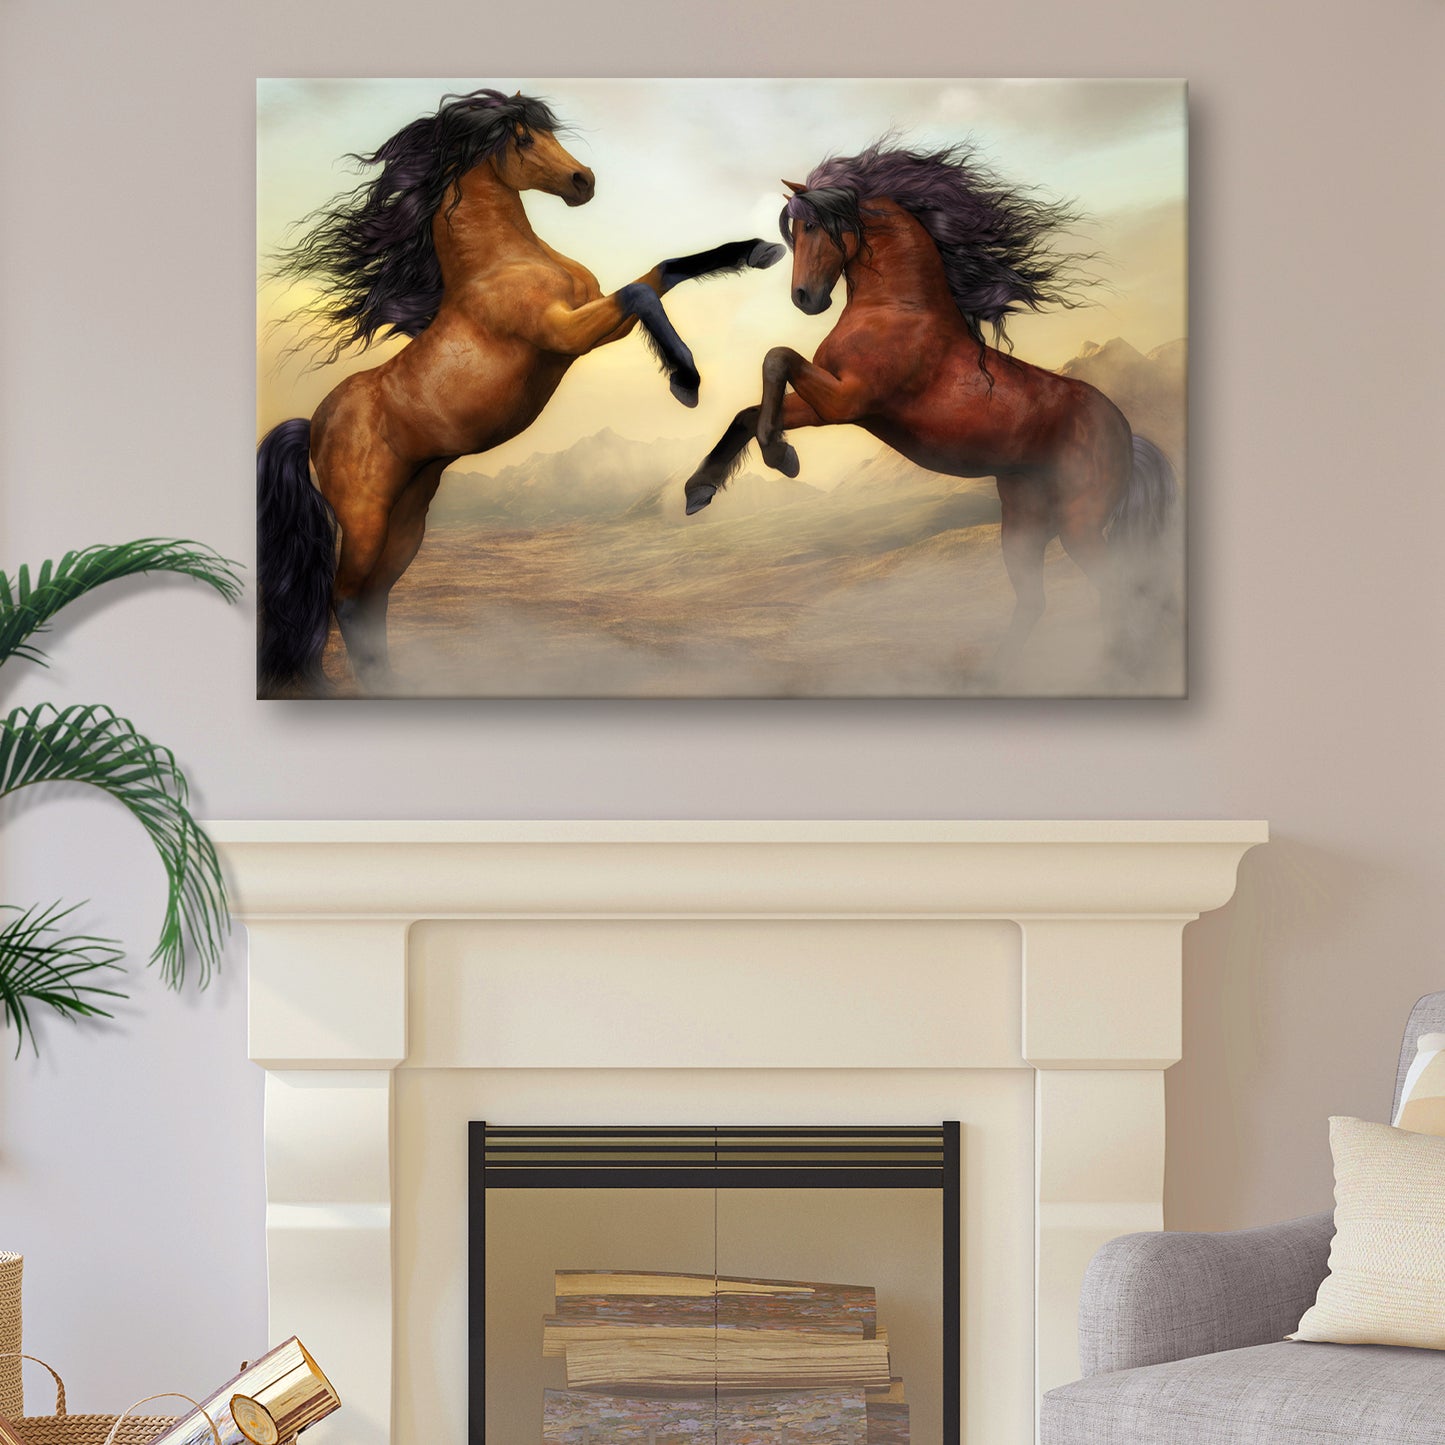 Clashing Wild Horses Canvas Wall Art - Image by Tailored Canvases